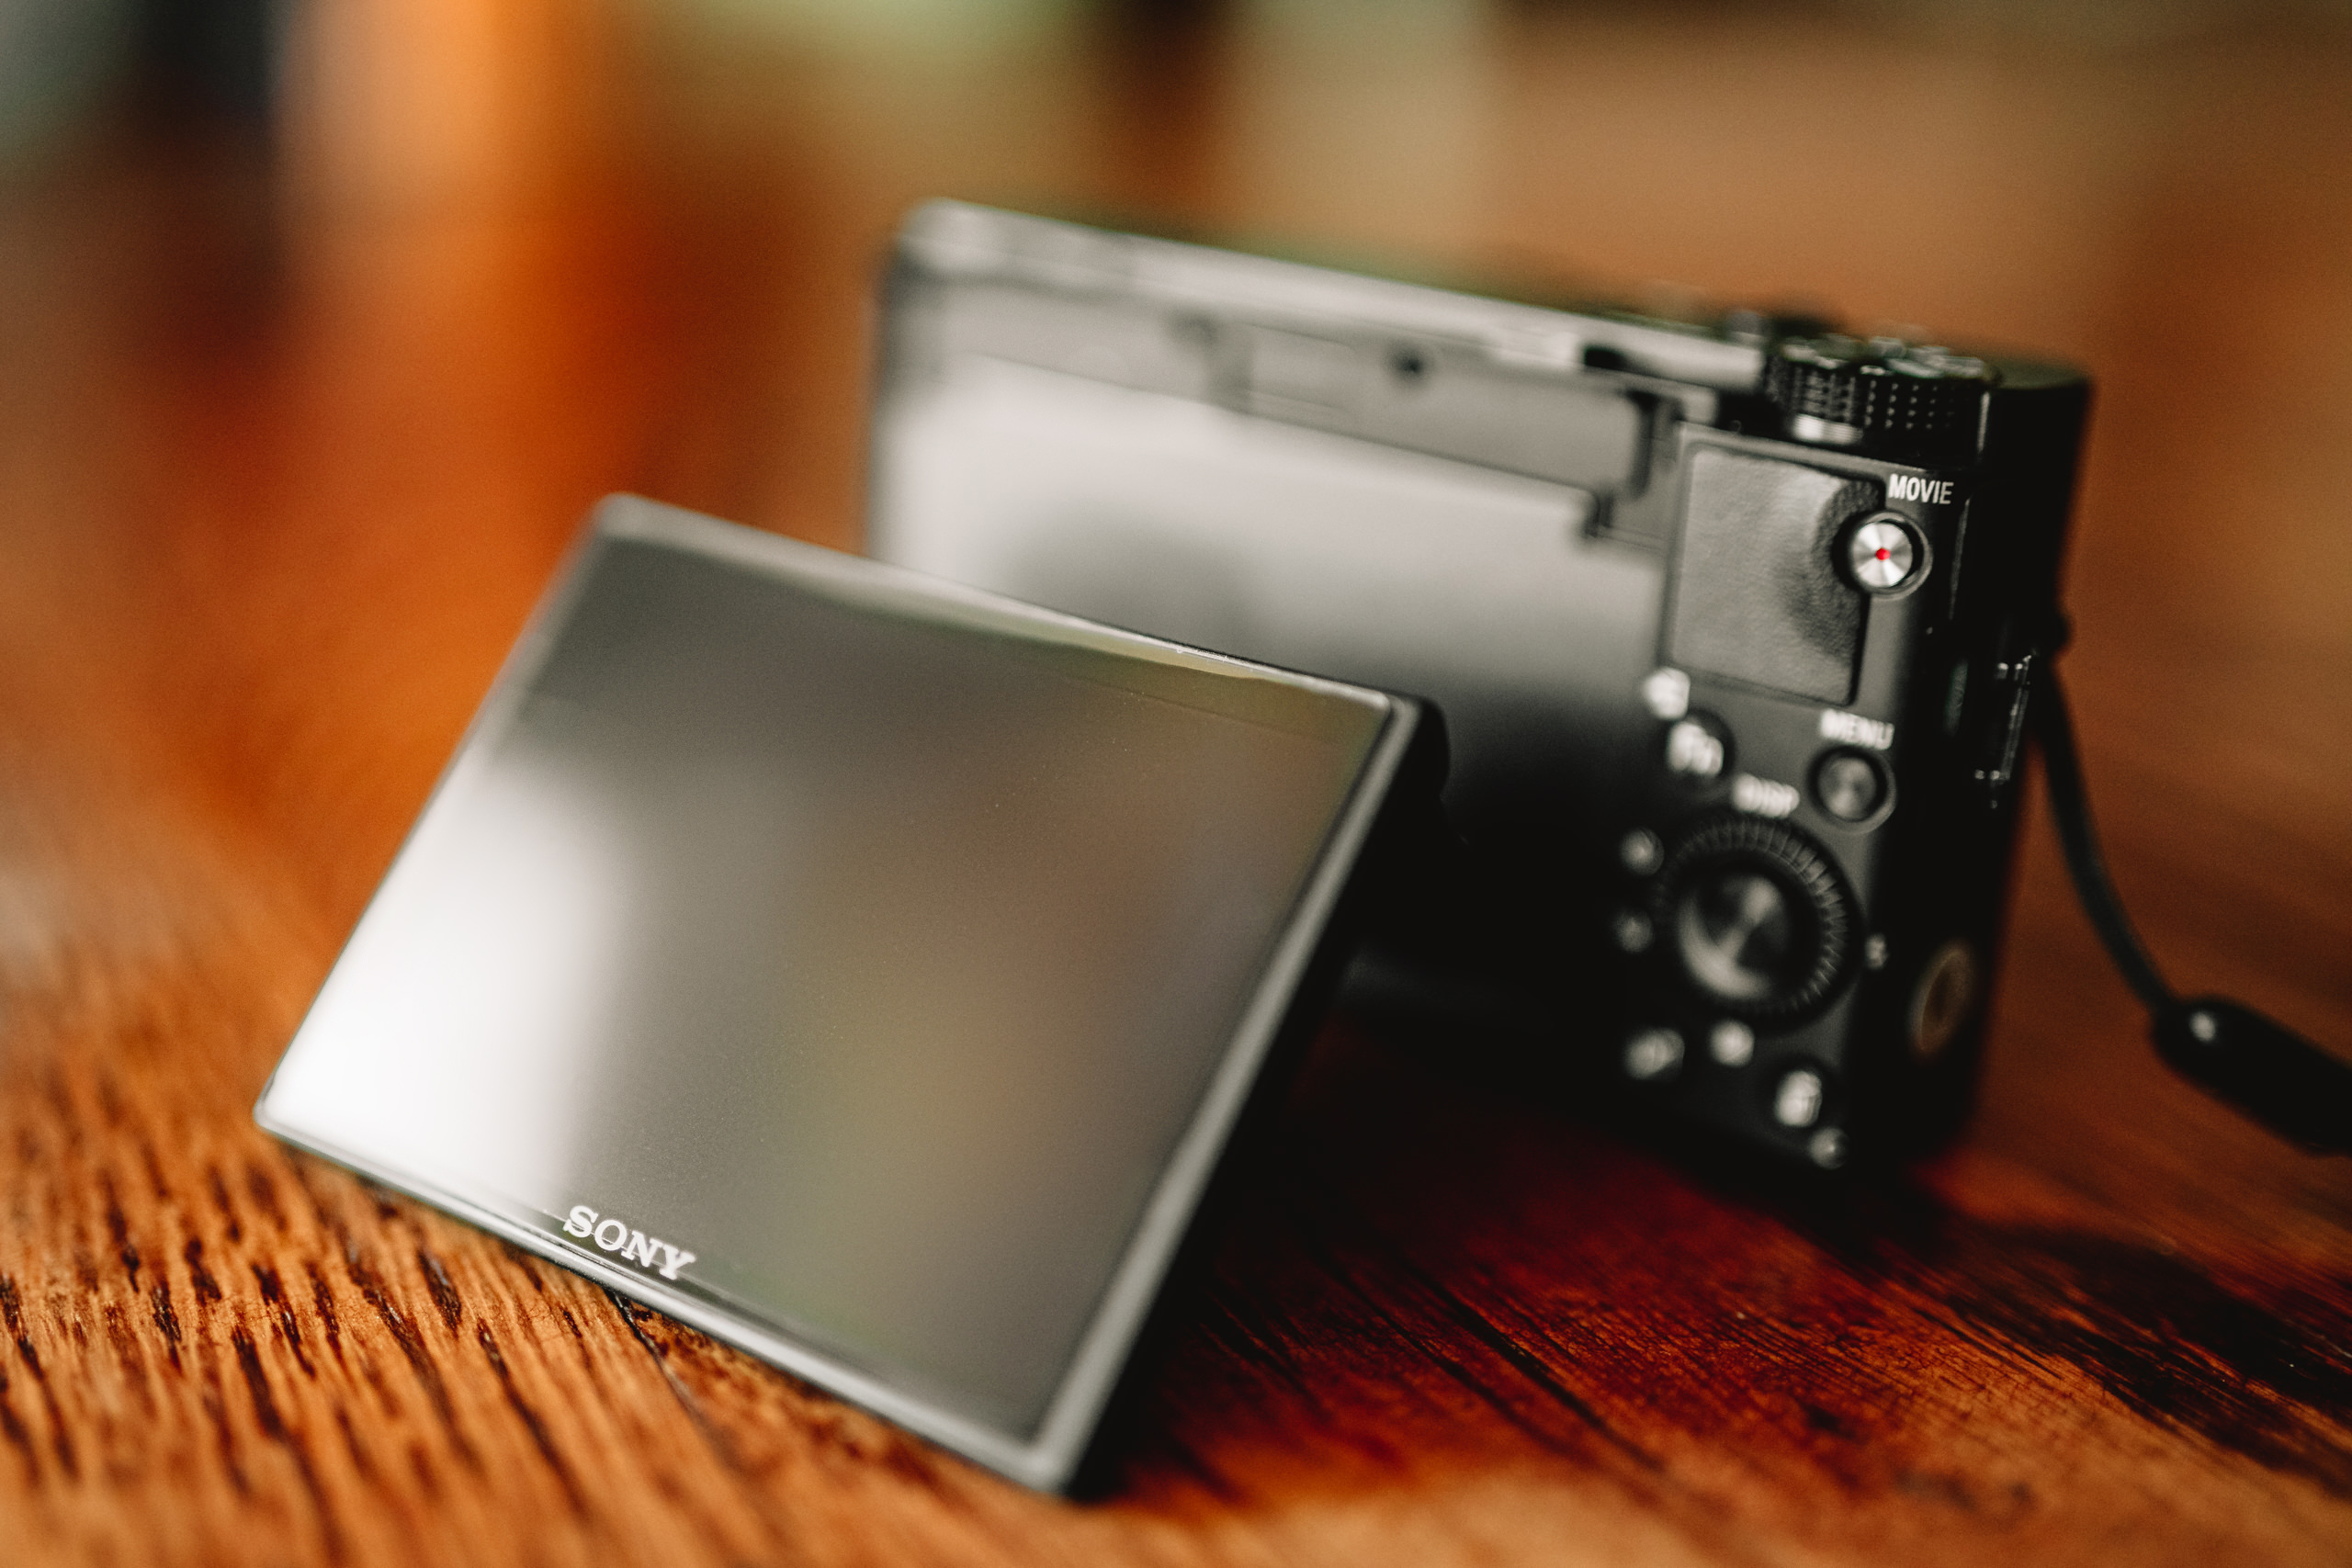 Sony Cyber-shot DSC-RX100 VII Review: Digital Photography Review